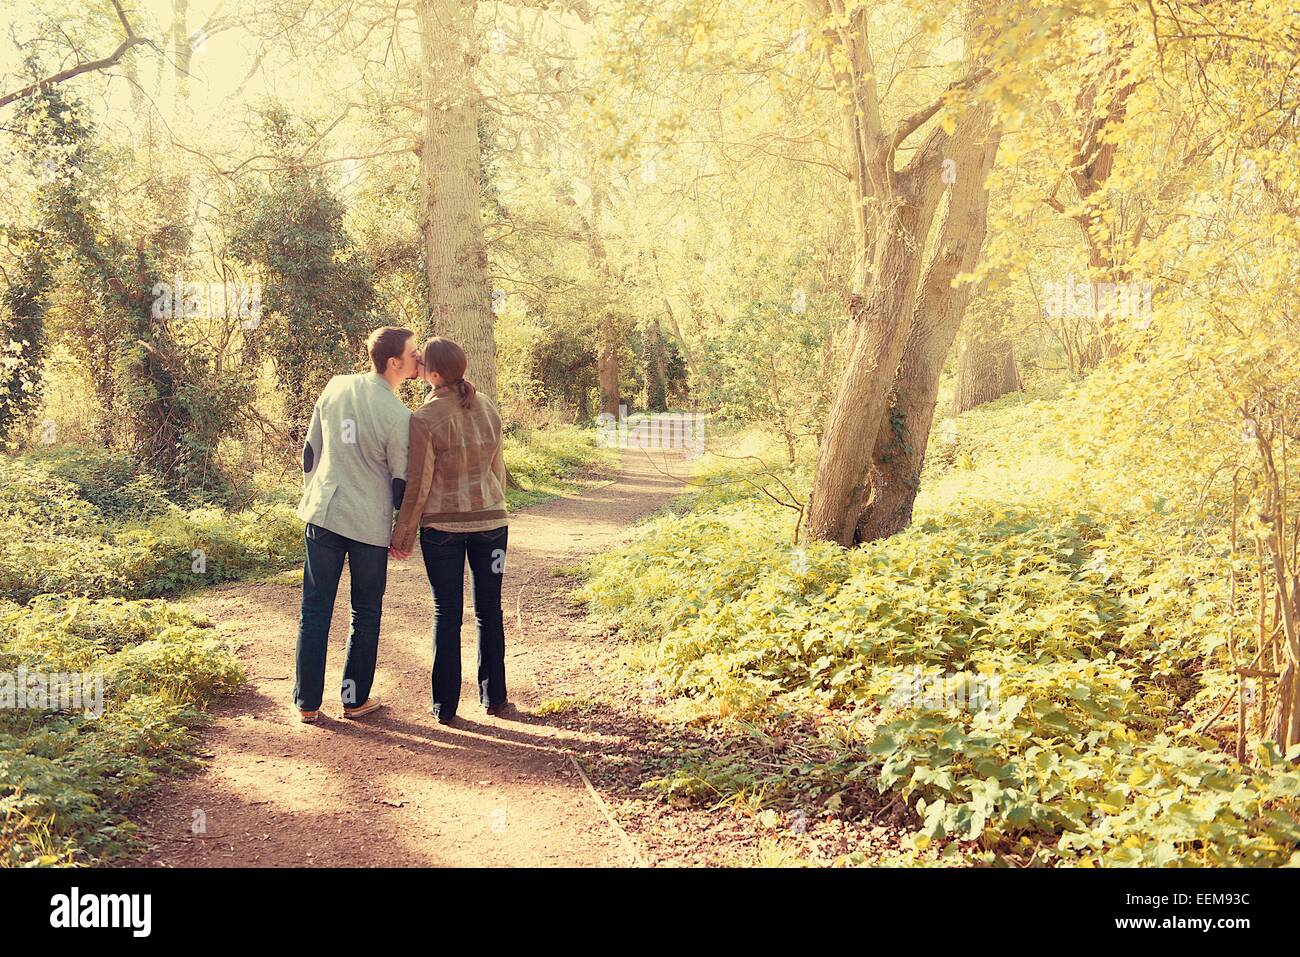 Couple walking in the park Stock Photo